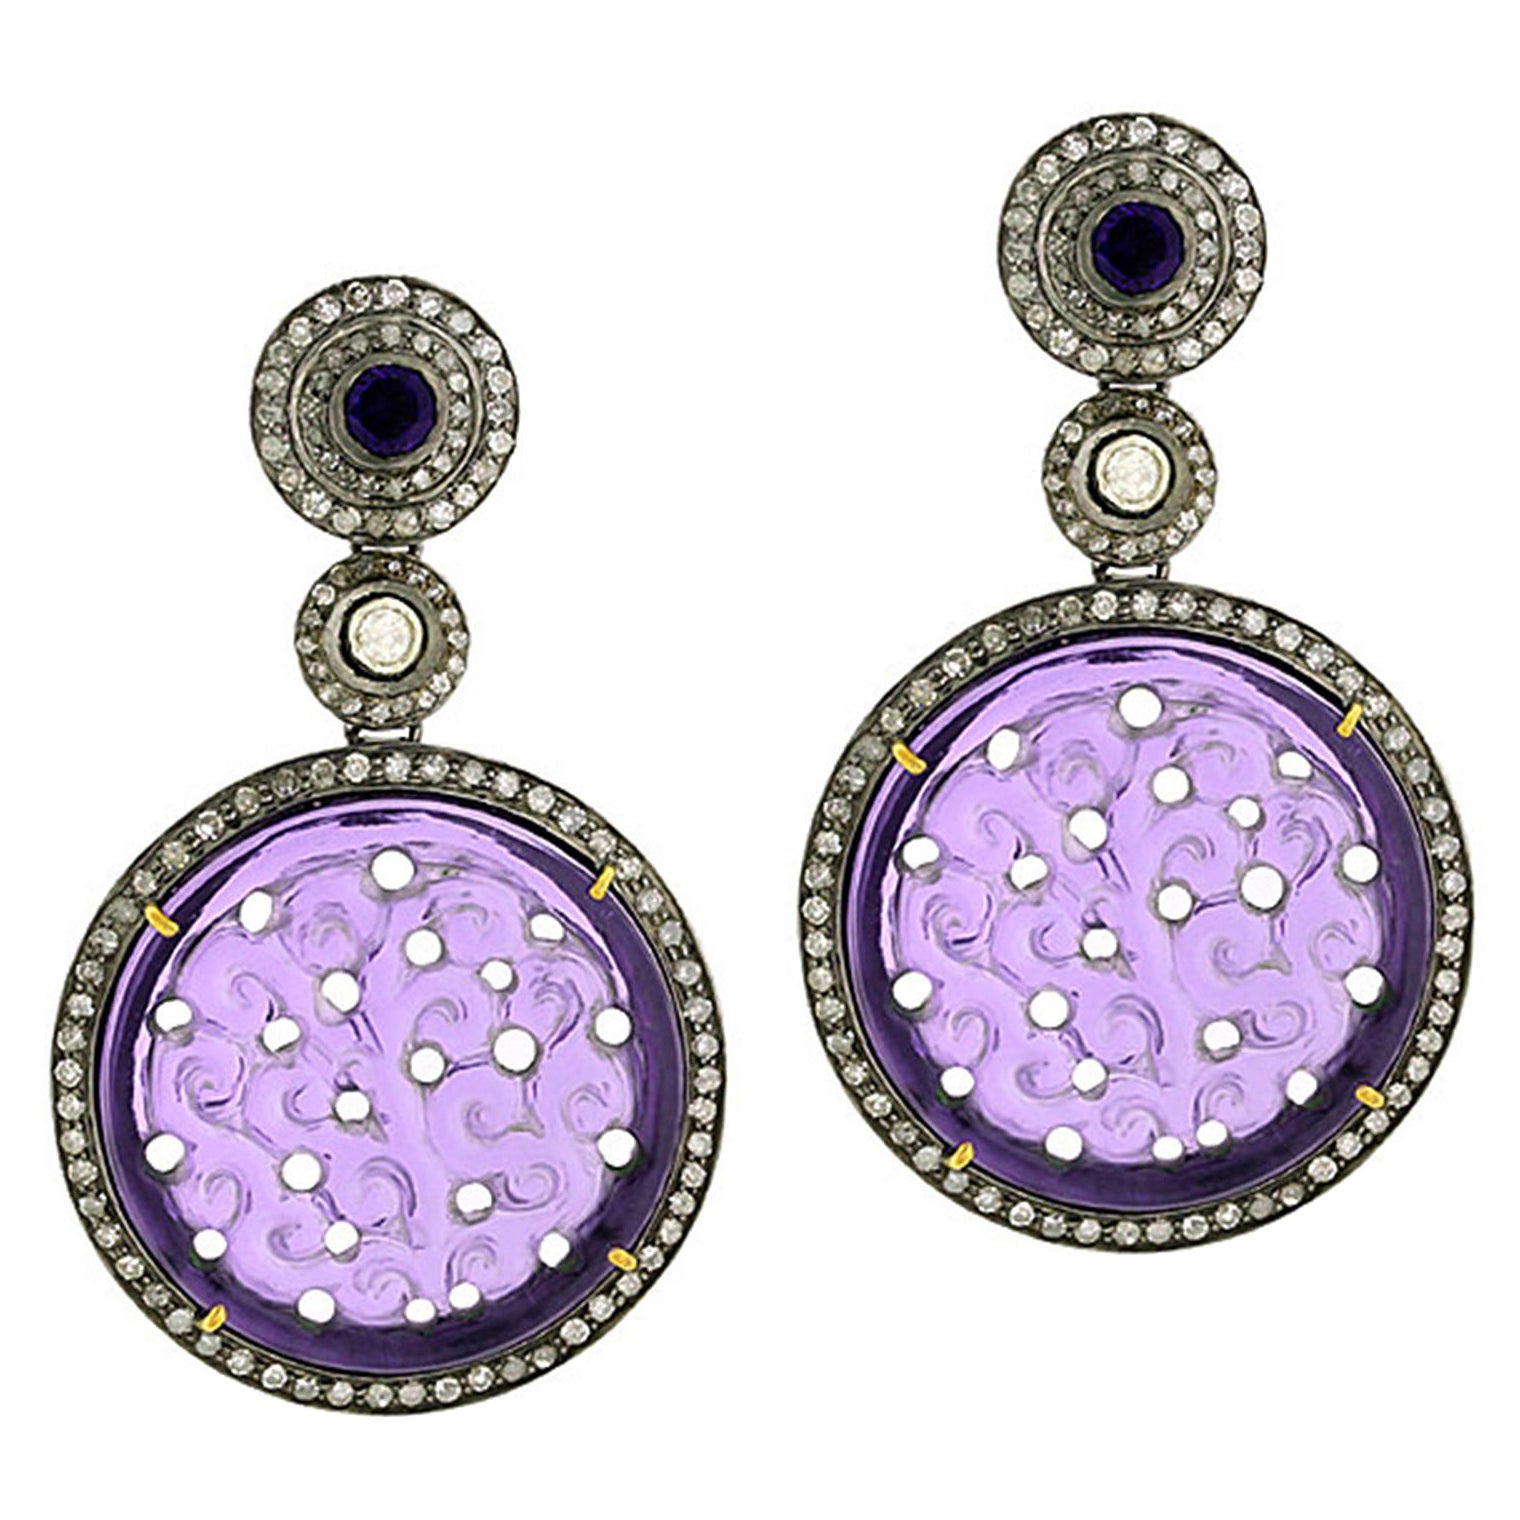 Carved Amethyst Dangle Earrings with Pave Diamonds Made in 18k Gold & Silver